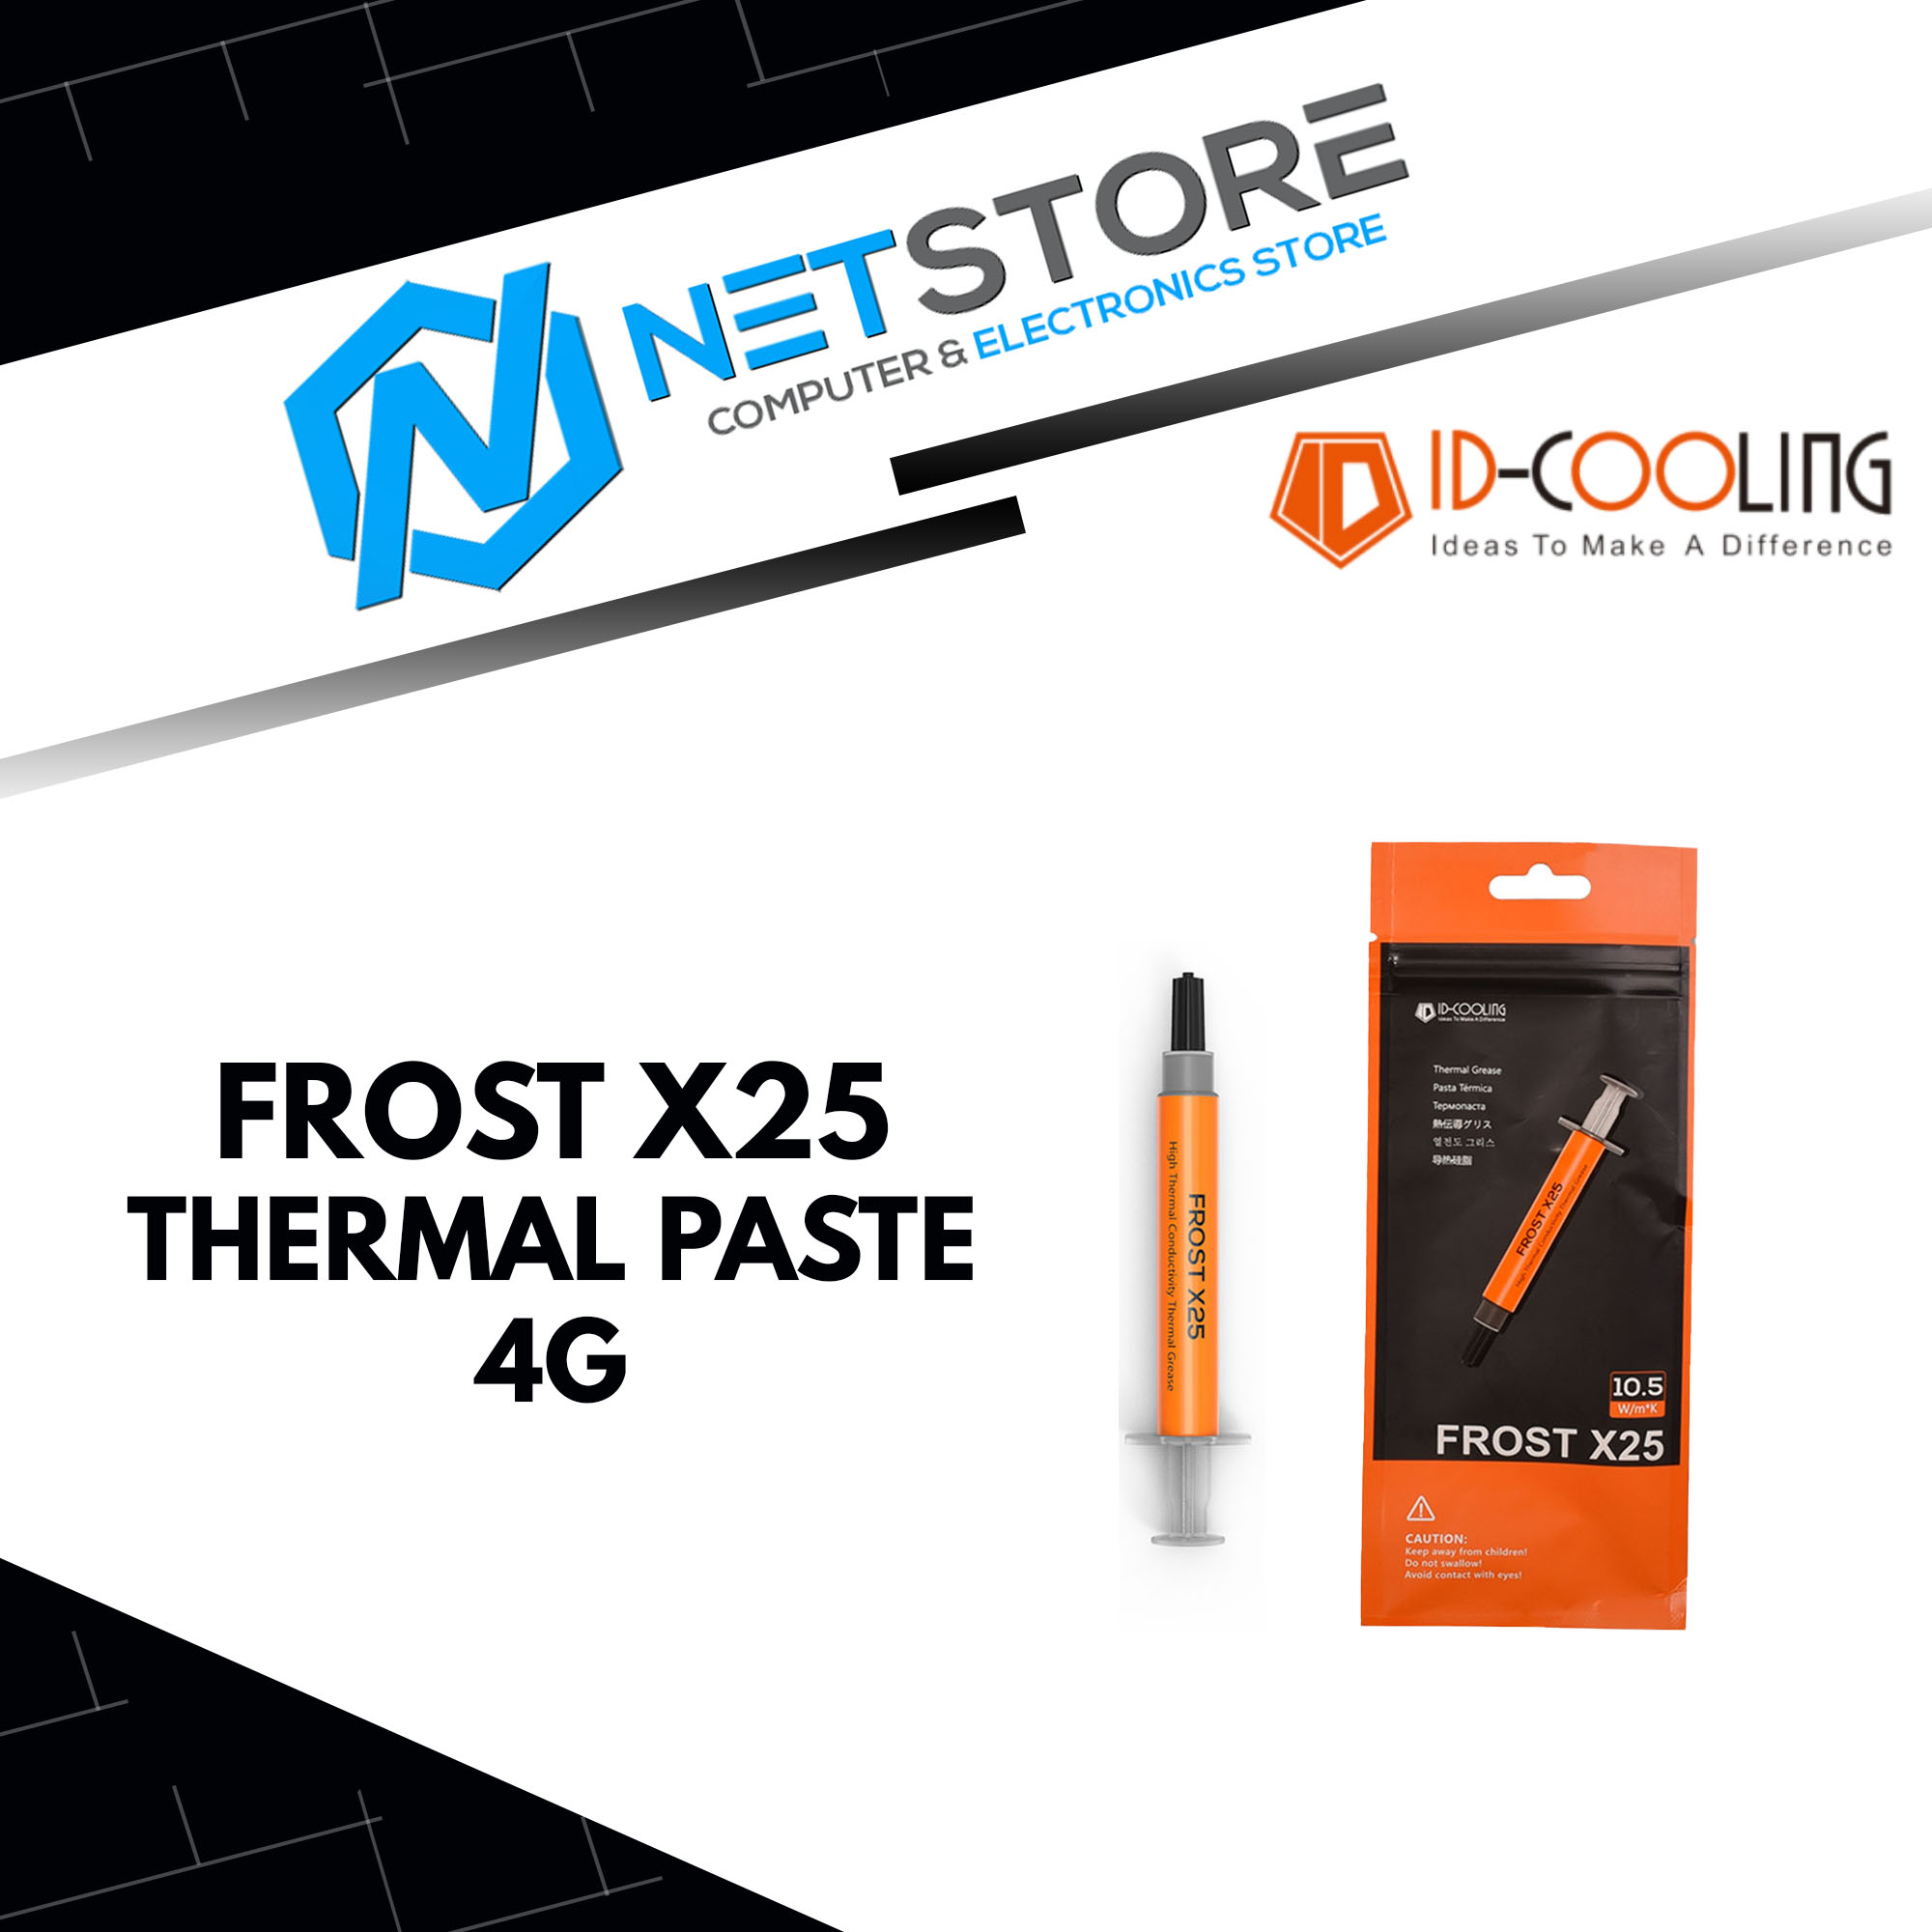 ID-COOLING FROST X25 THERMAL PASTE 4G